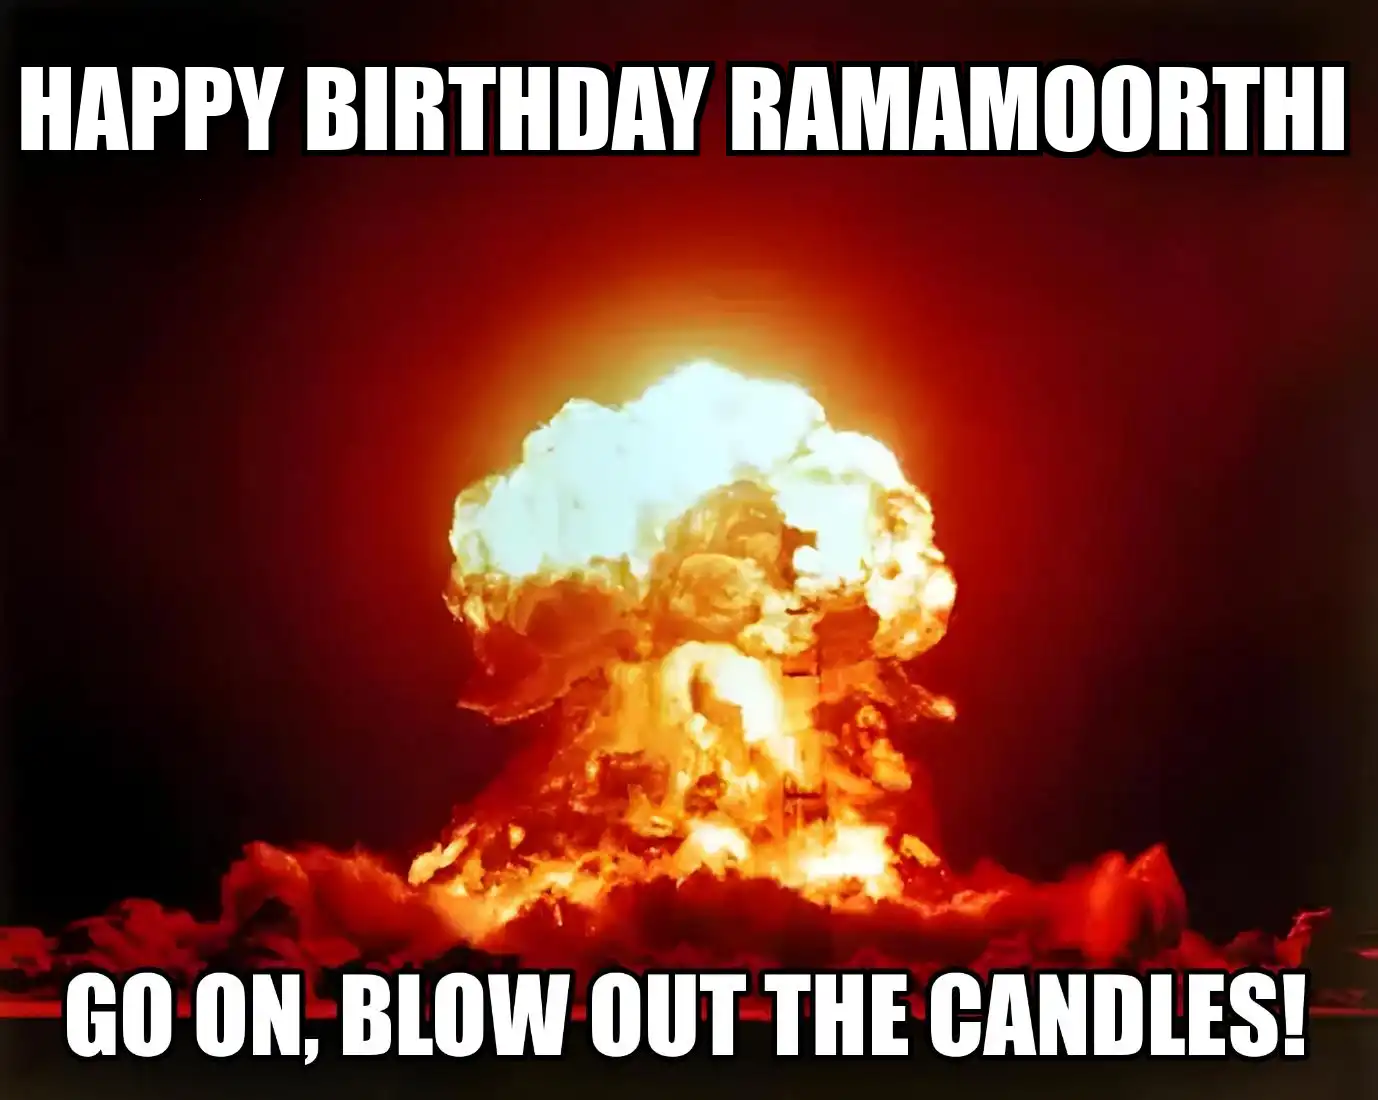 Happy Birthday Ramamoorthi Go On Blow Out The Candles Meme